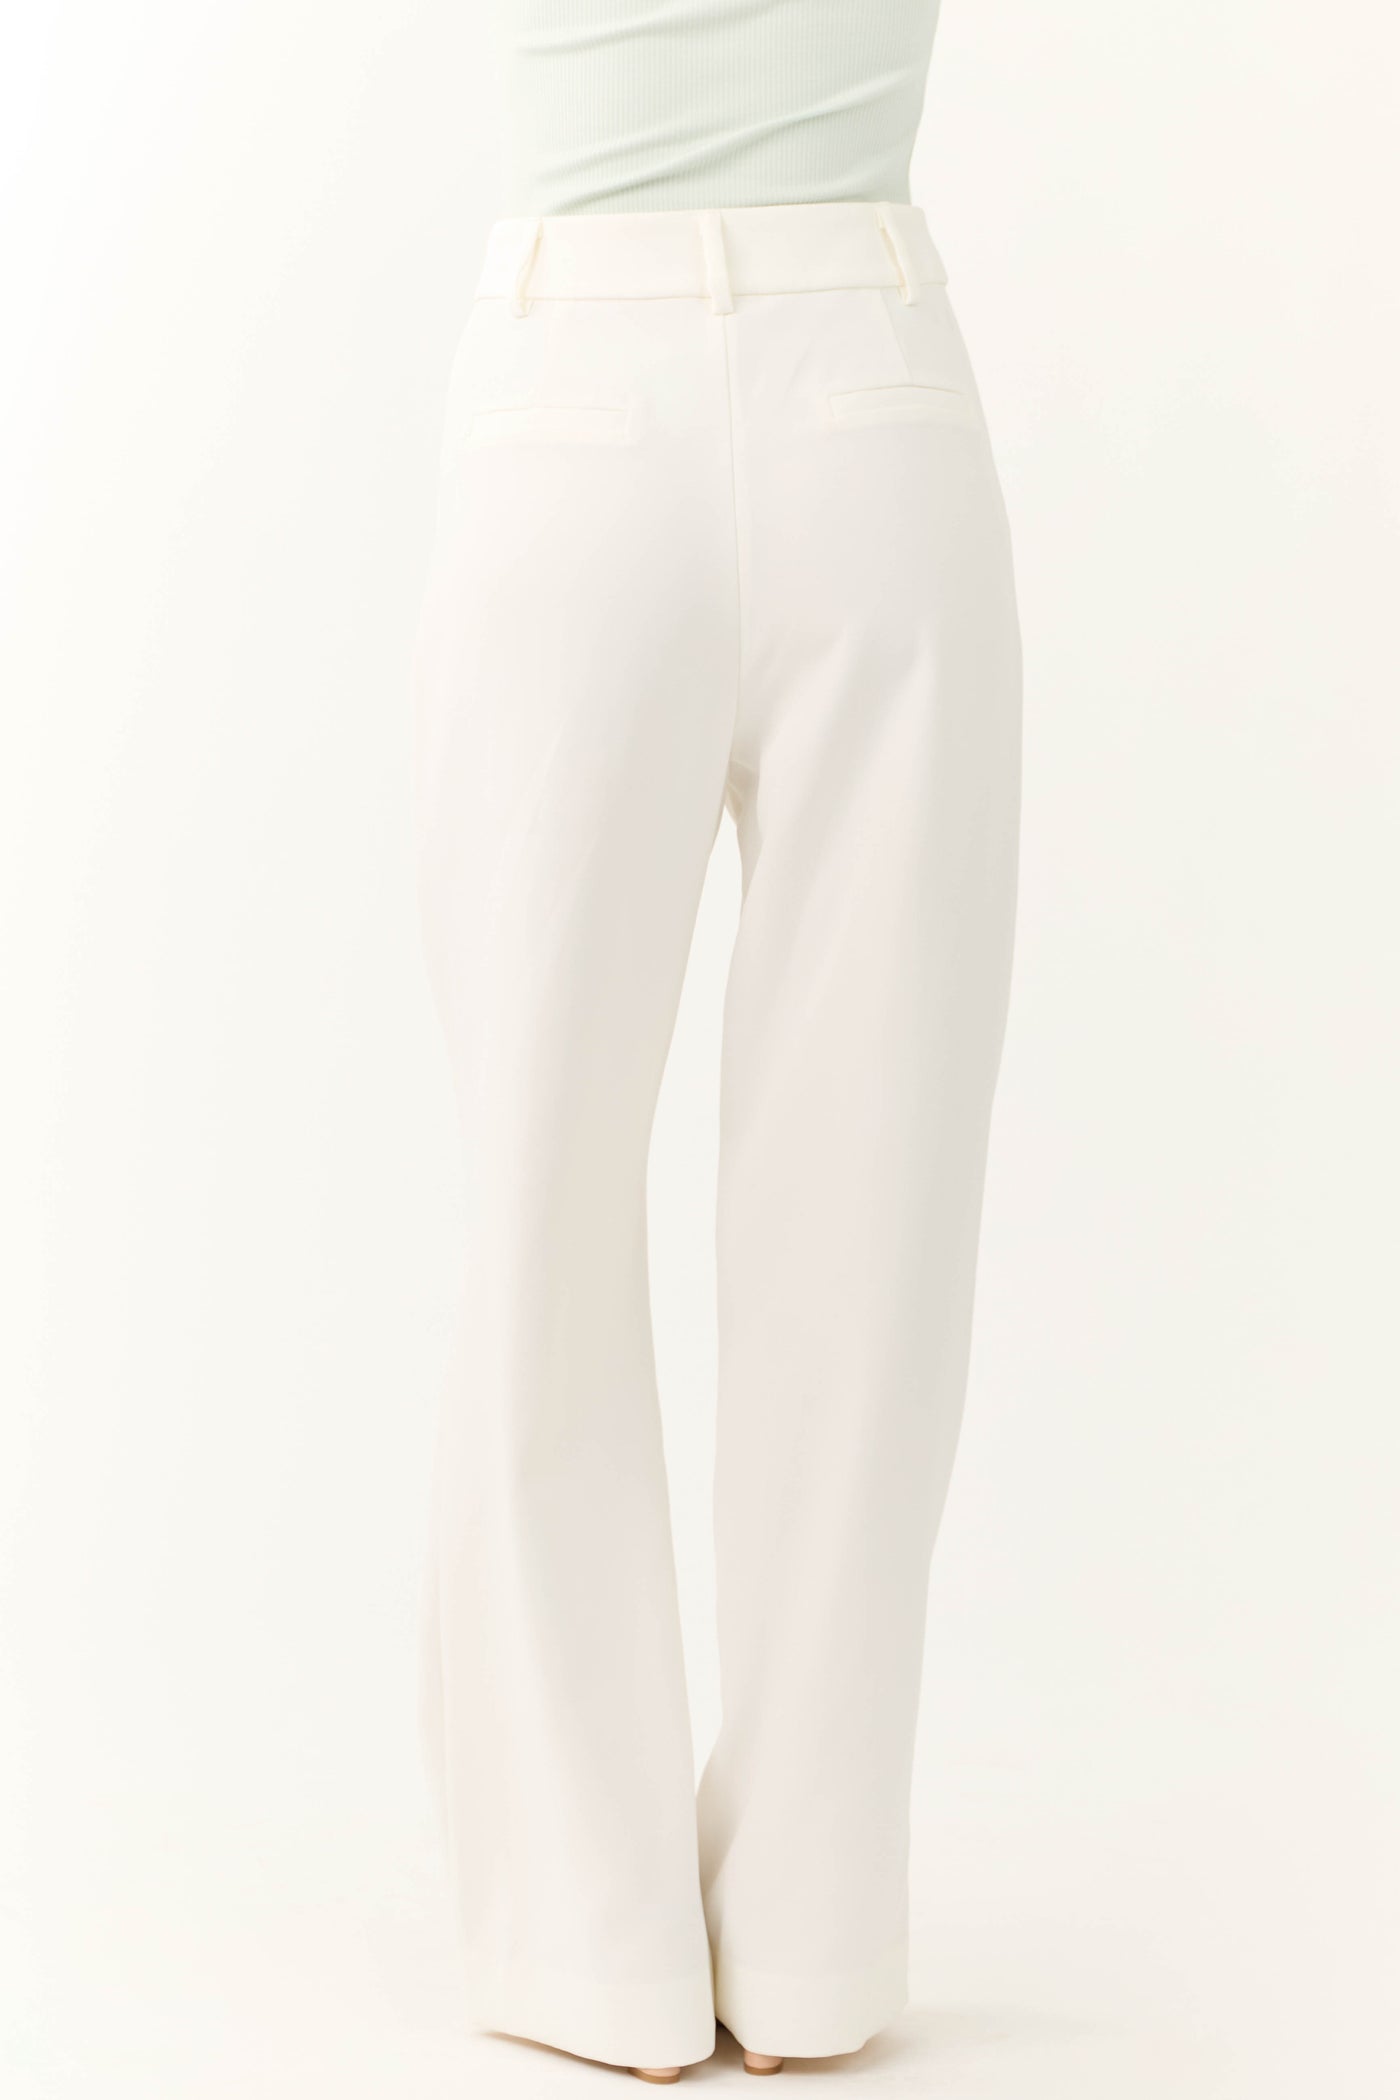 Off White Pleated High Waist Trouser Pants